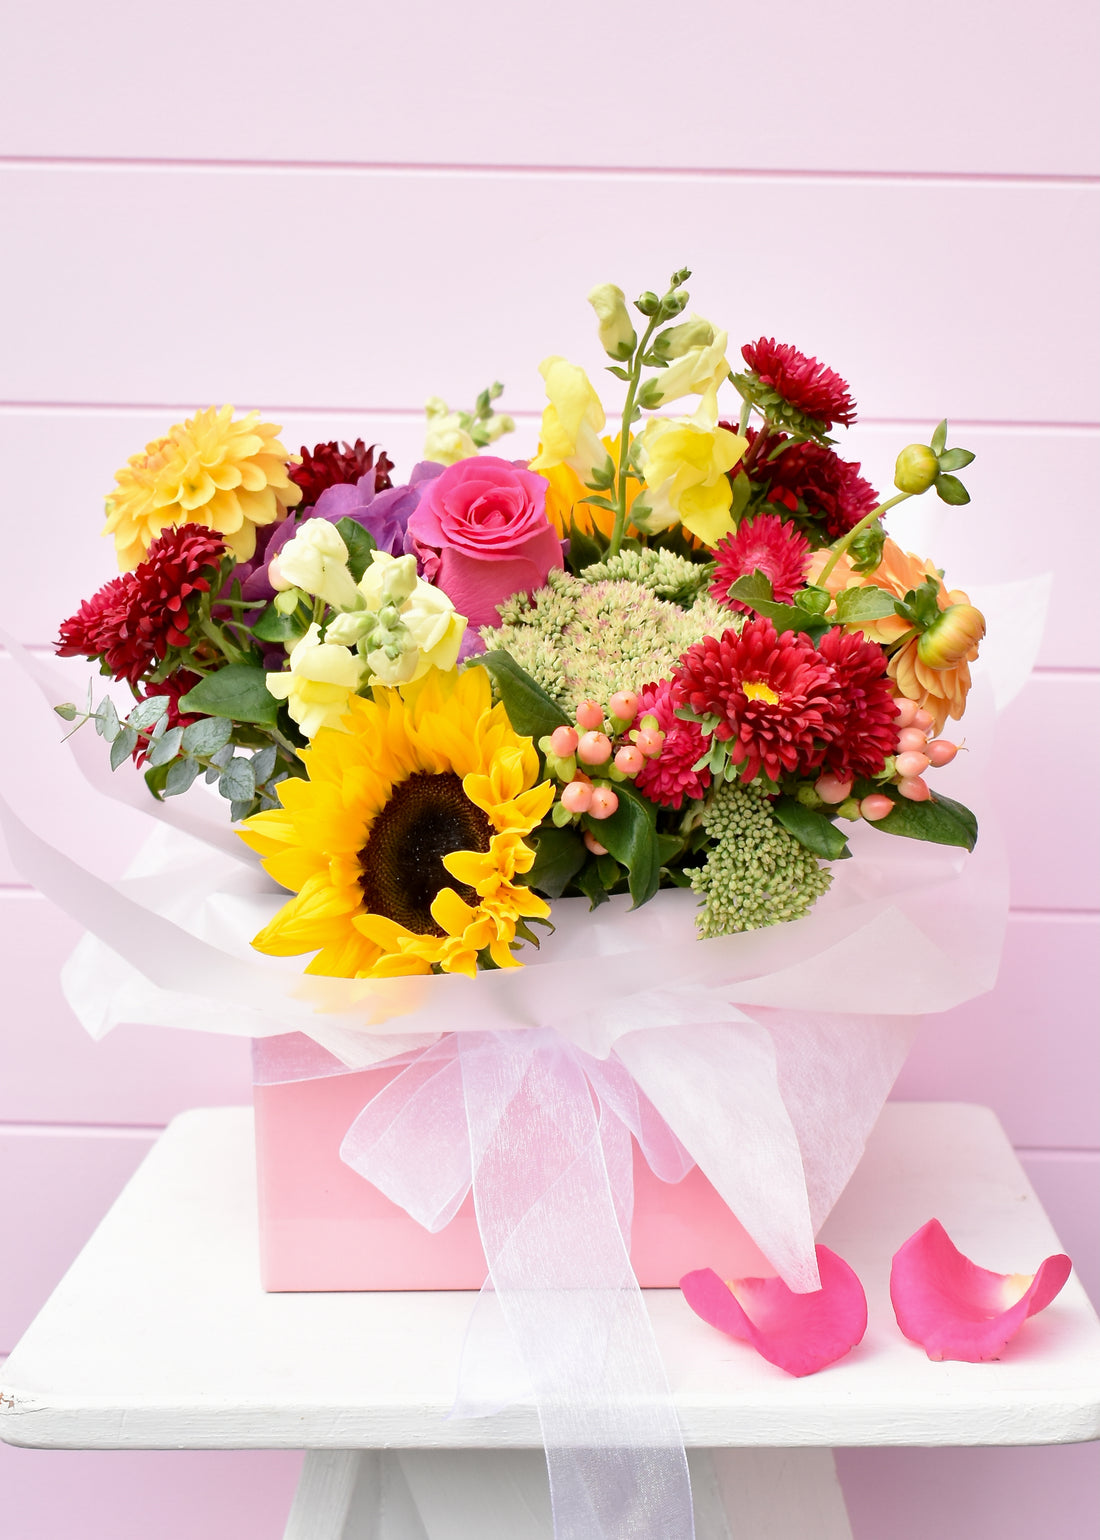 Bright coloured flowers in a pink box. Includes sunflowers, pink roses and daisies